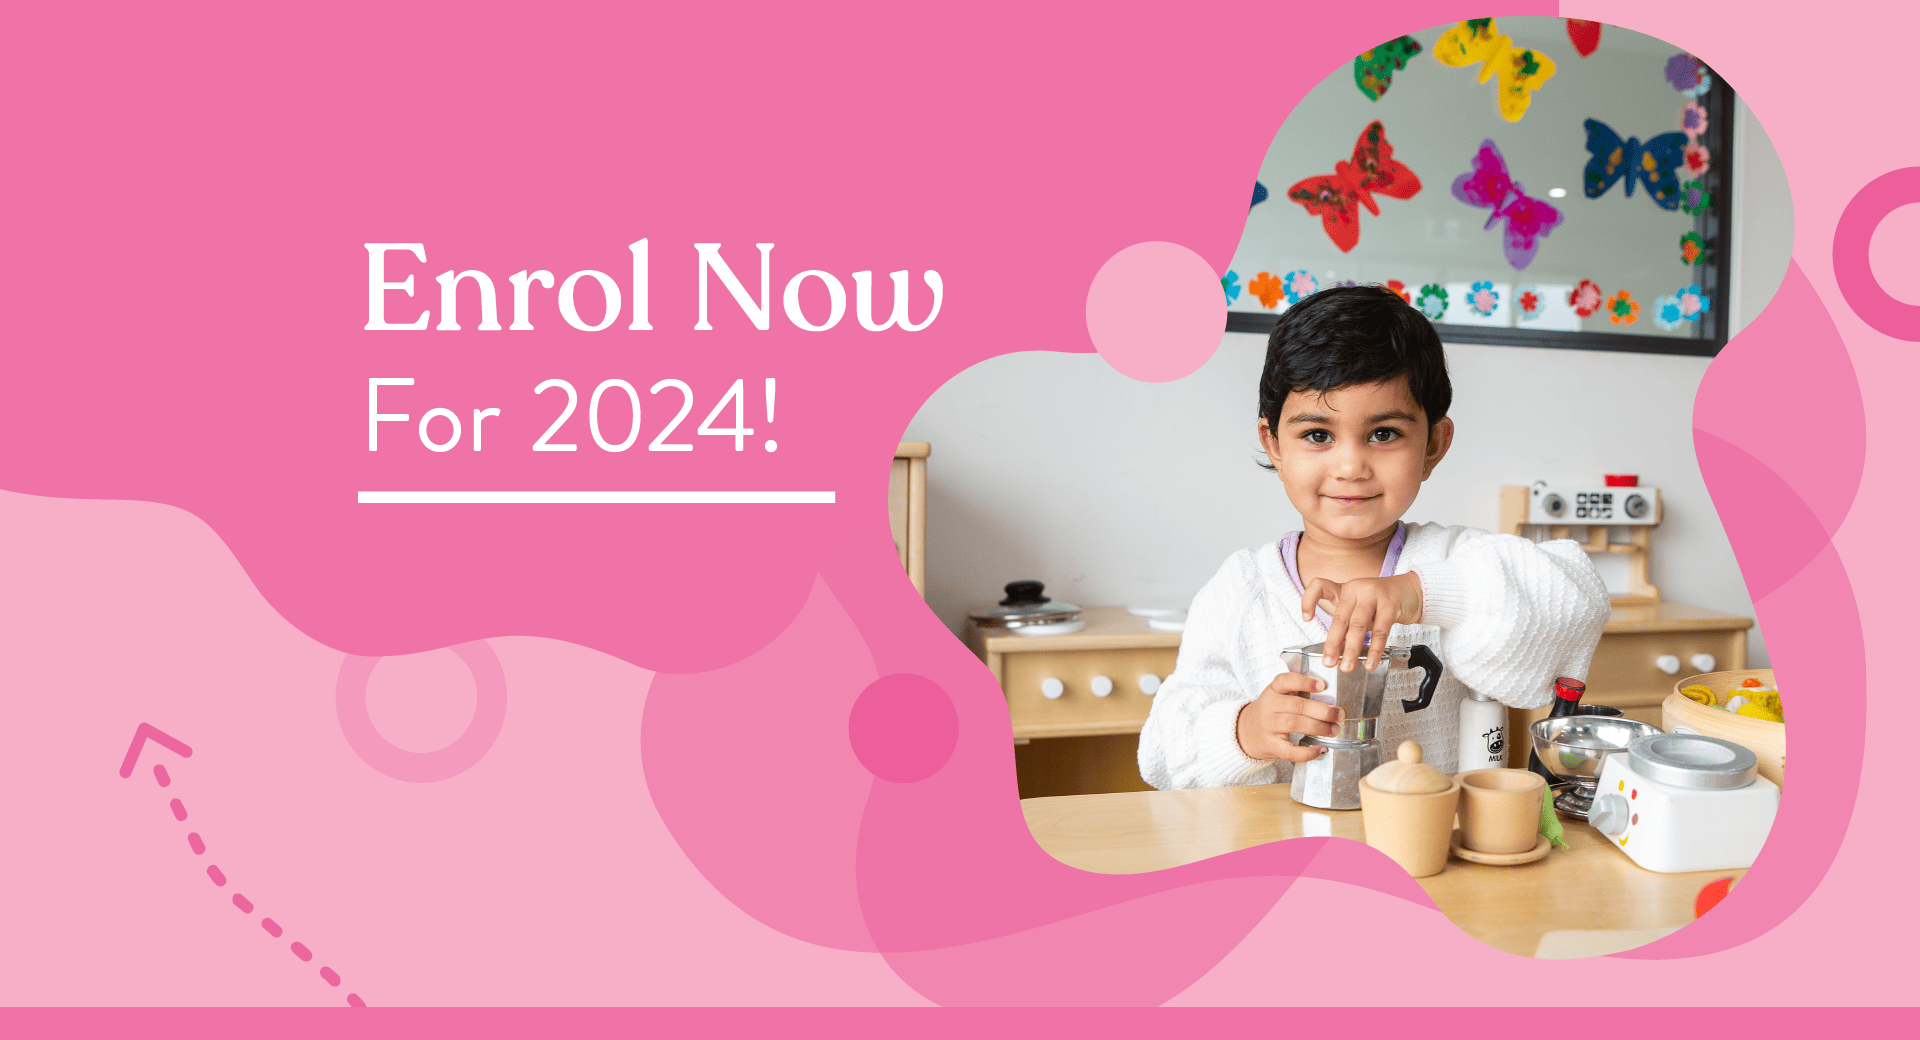 Enrol now for 2024